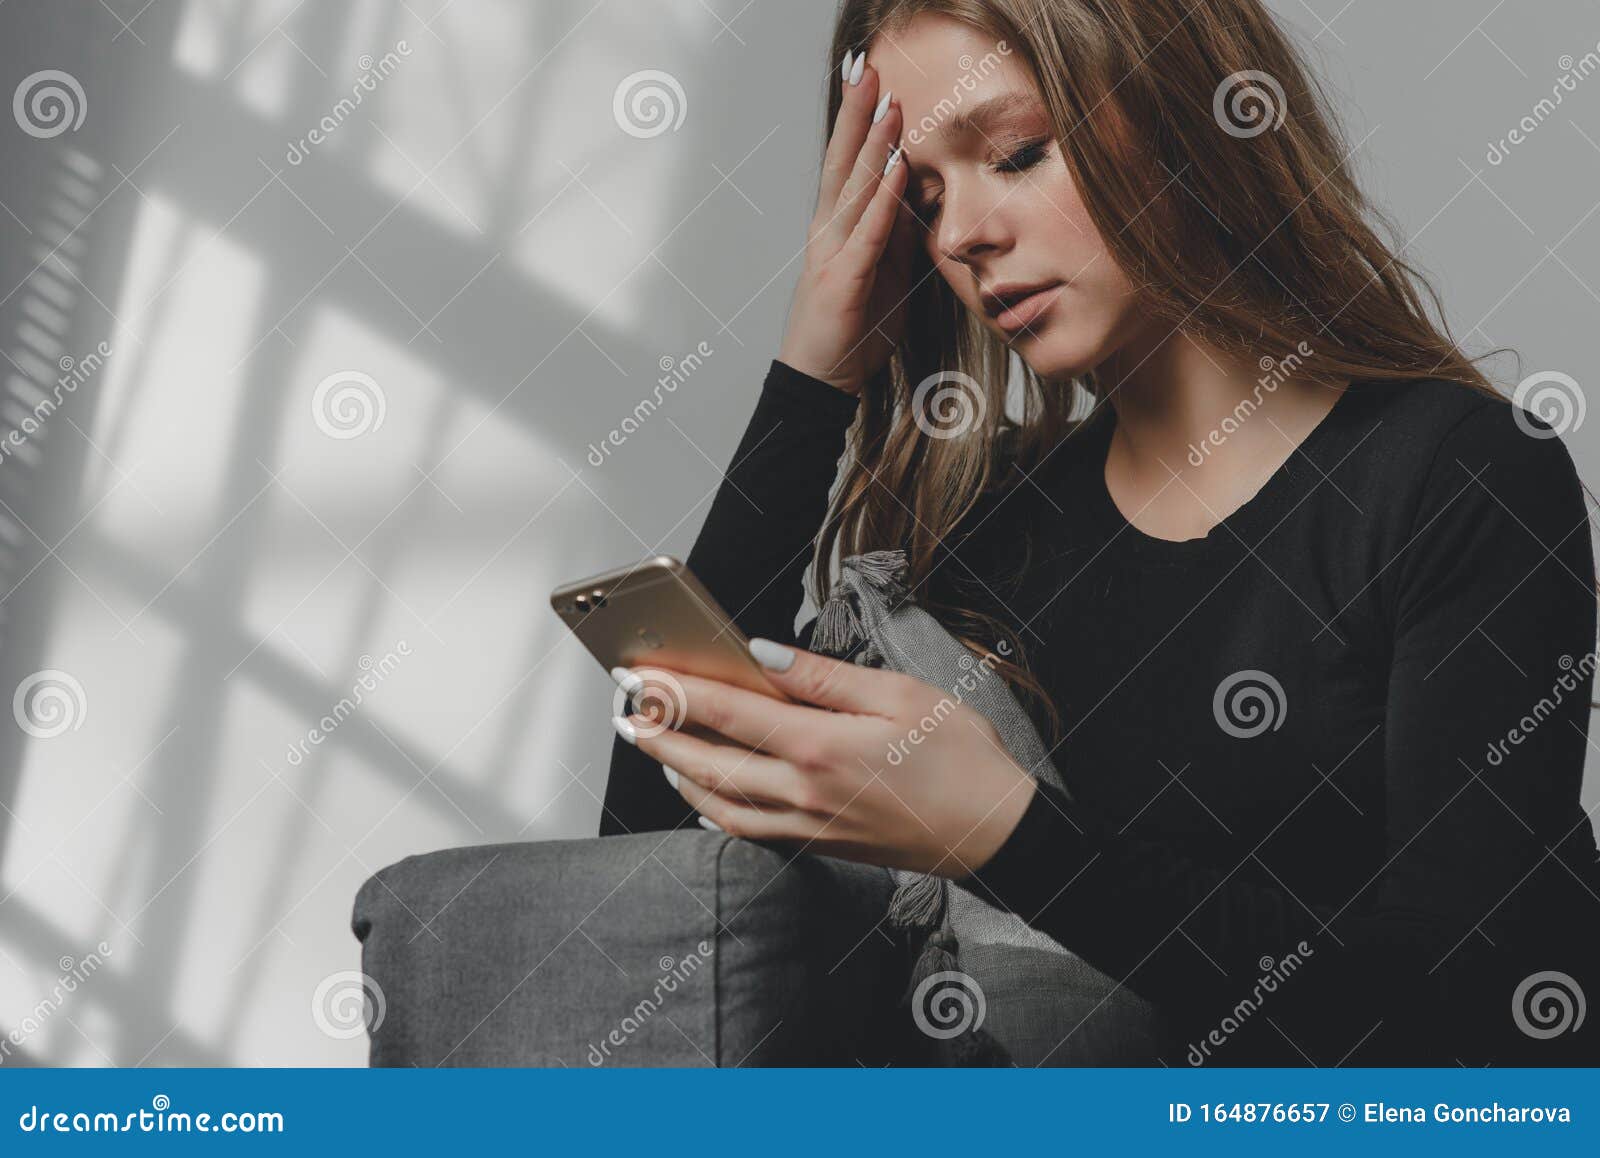 Portrait of a Young Sad Crying Girl with a Smartphone in Her Hand ...